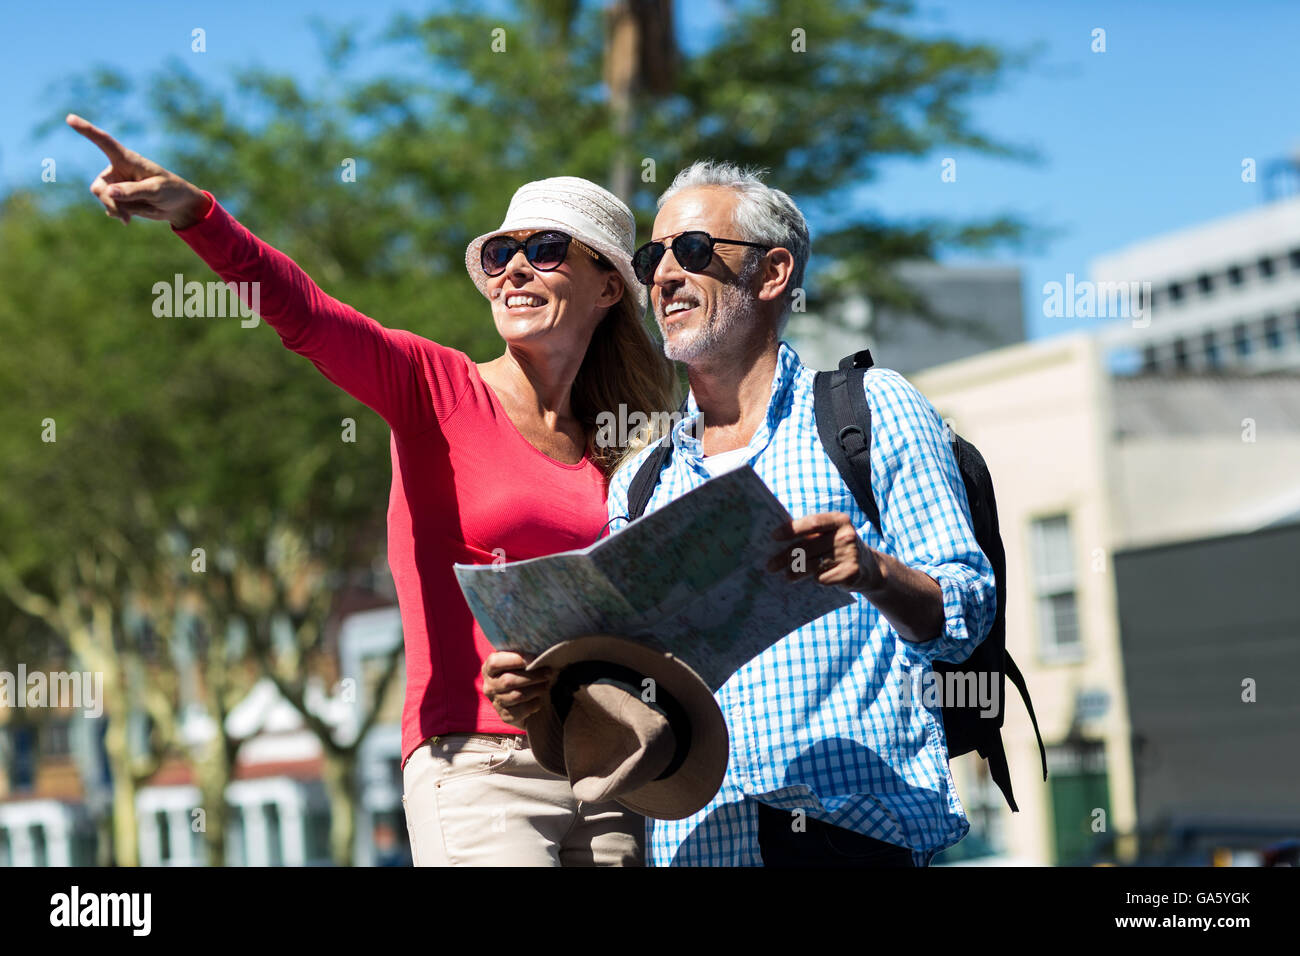 Woman pointing while standing by man in city Stock Photo